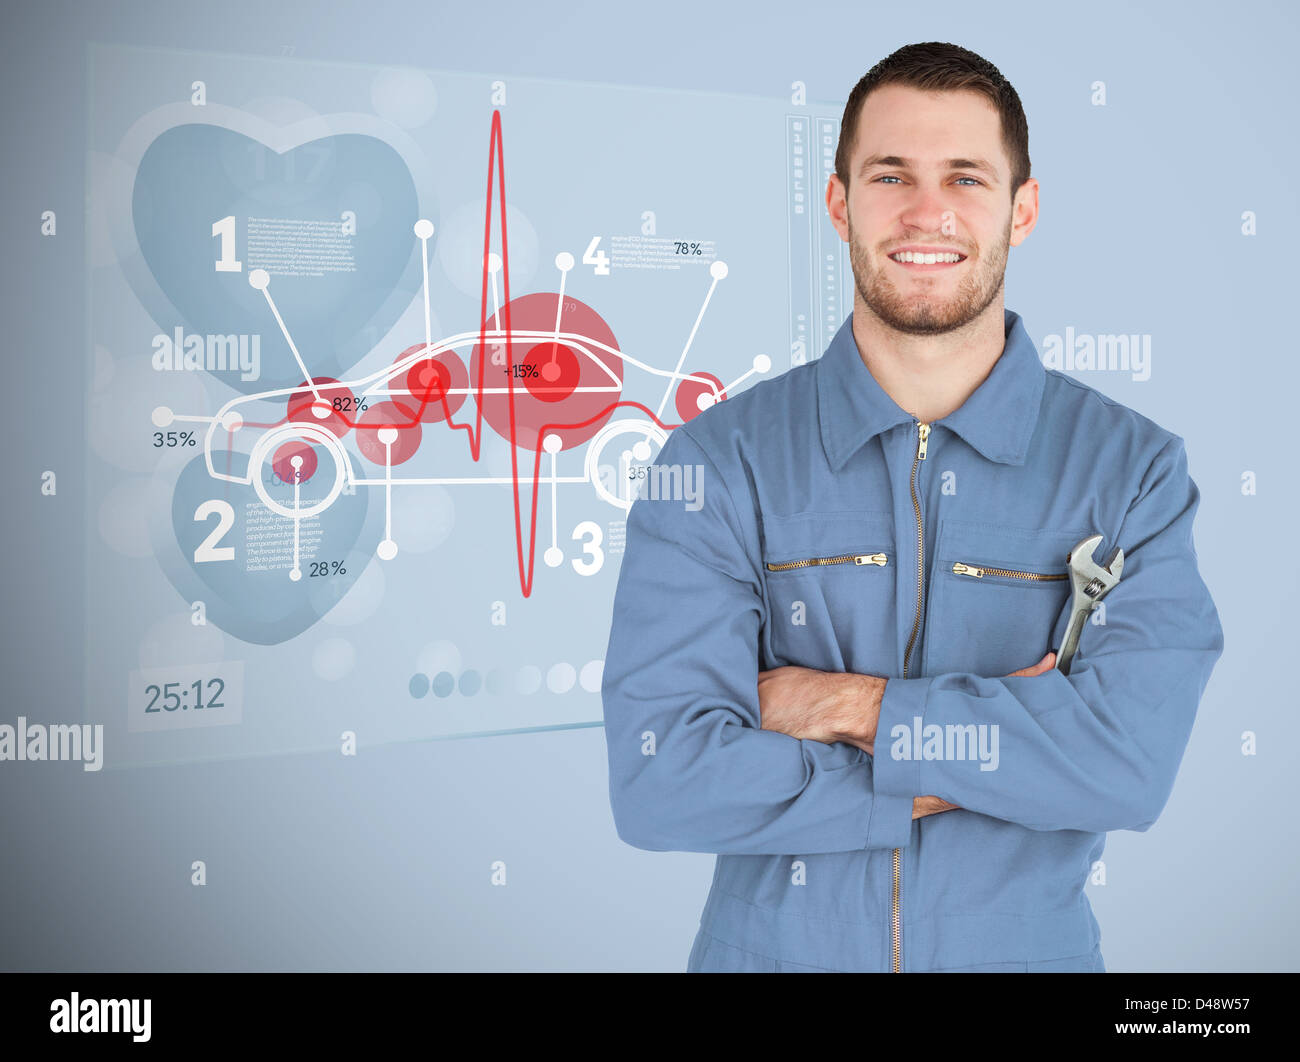 Portrait of a young mechanic next to futuristic interface with diagram Stock Photo